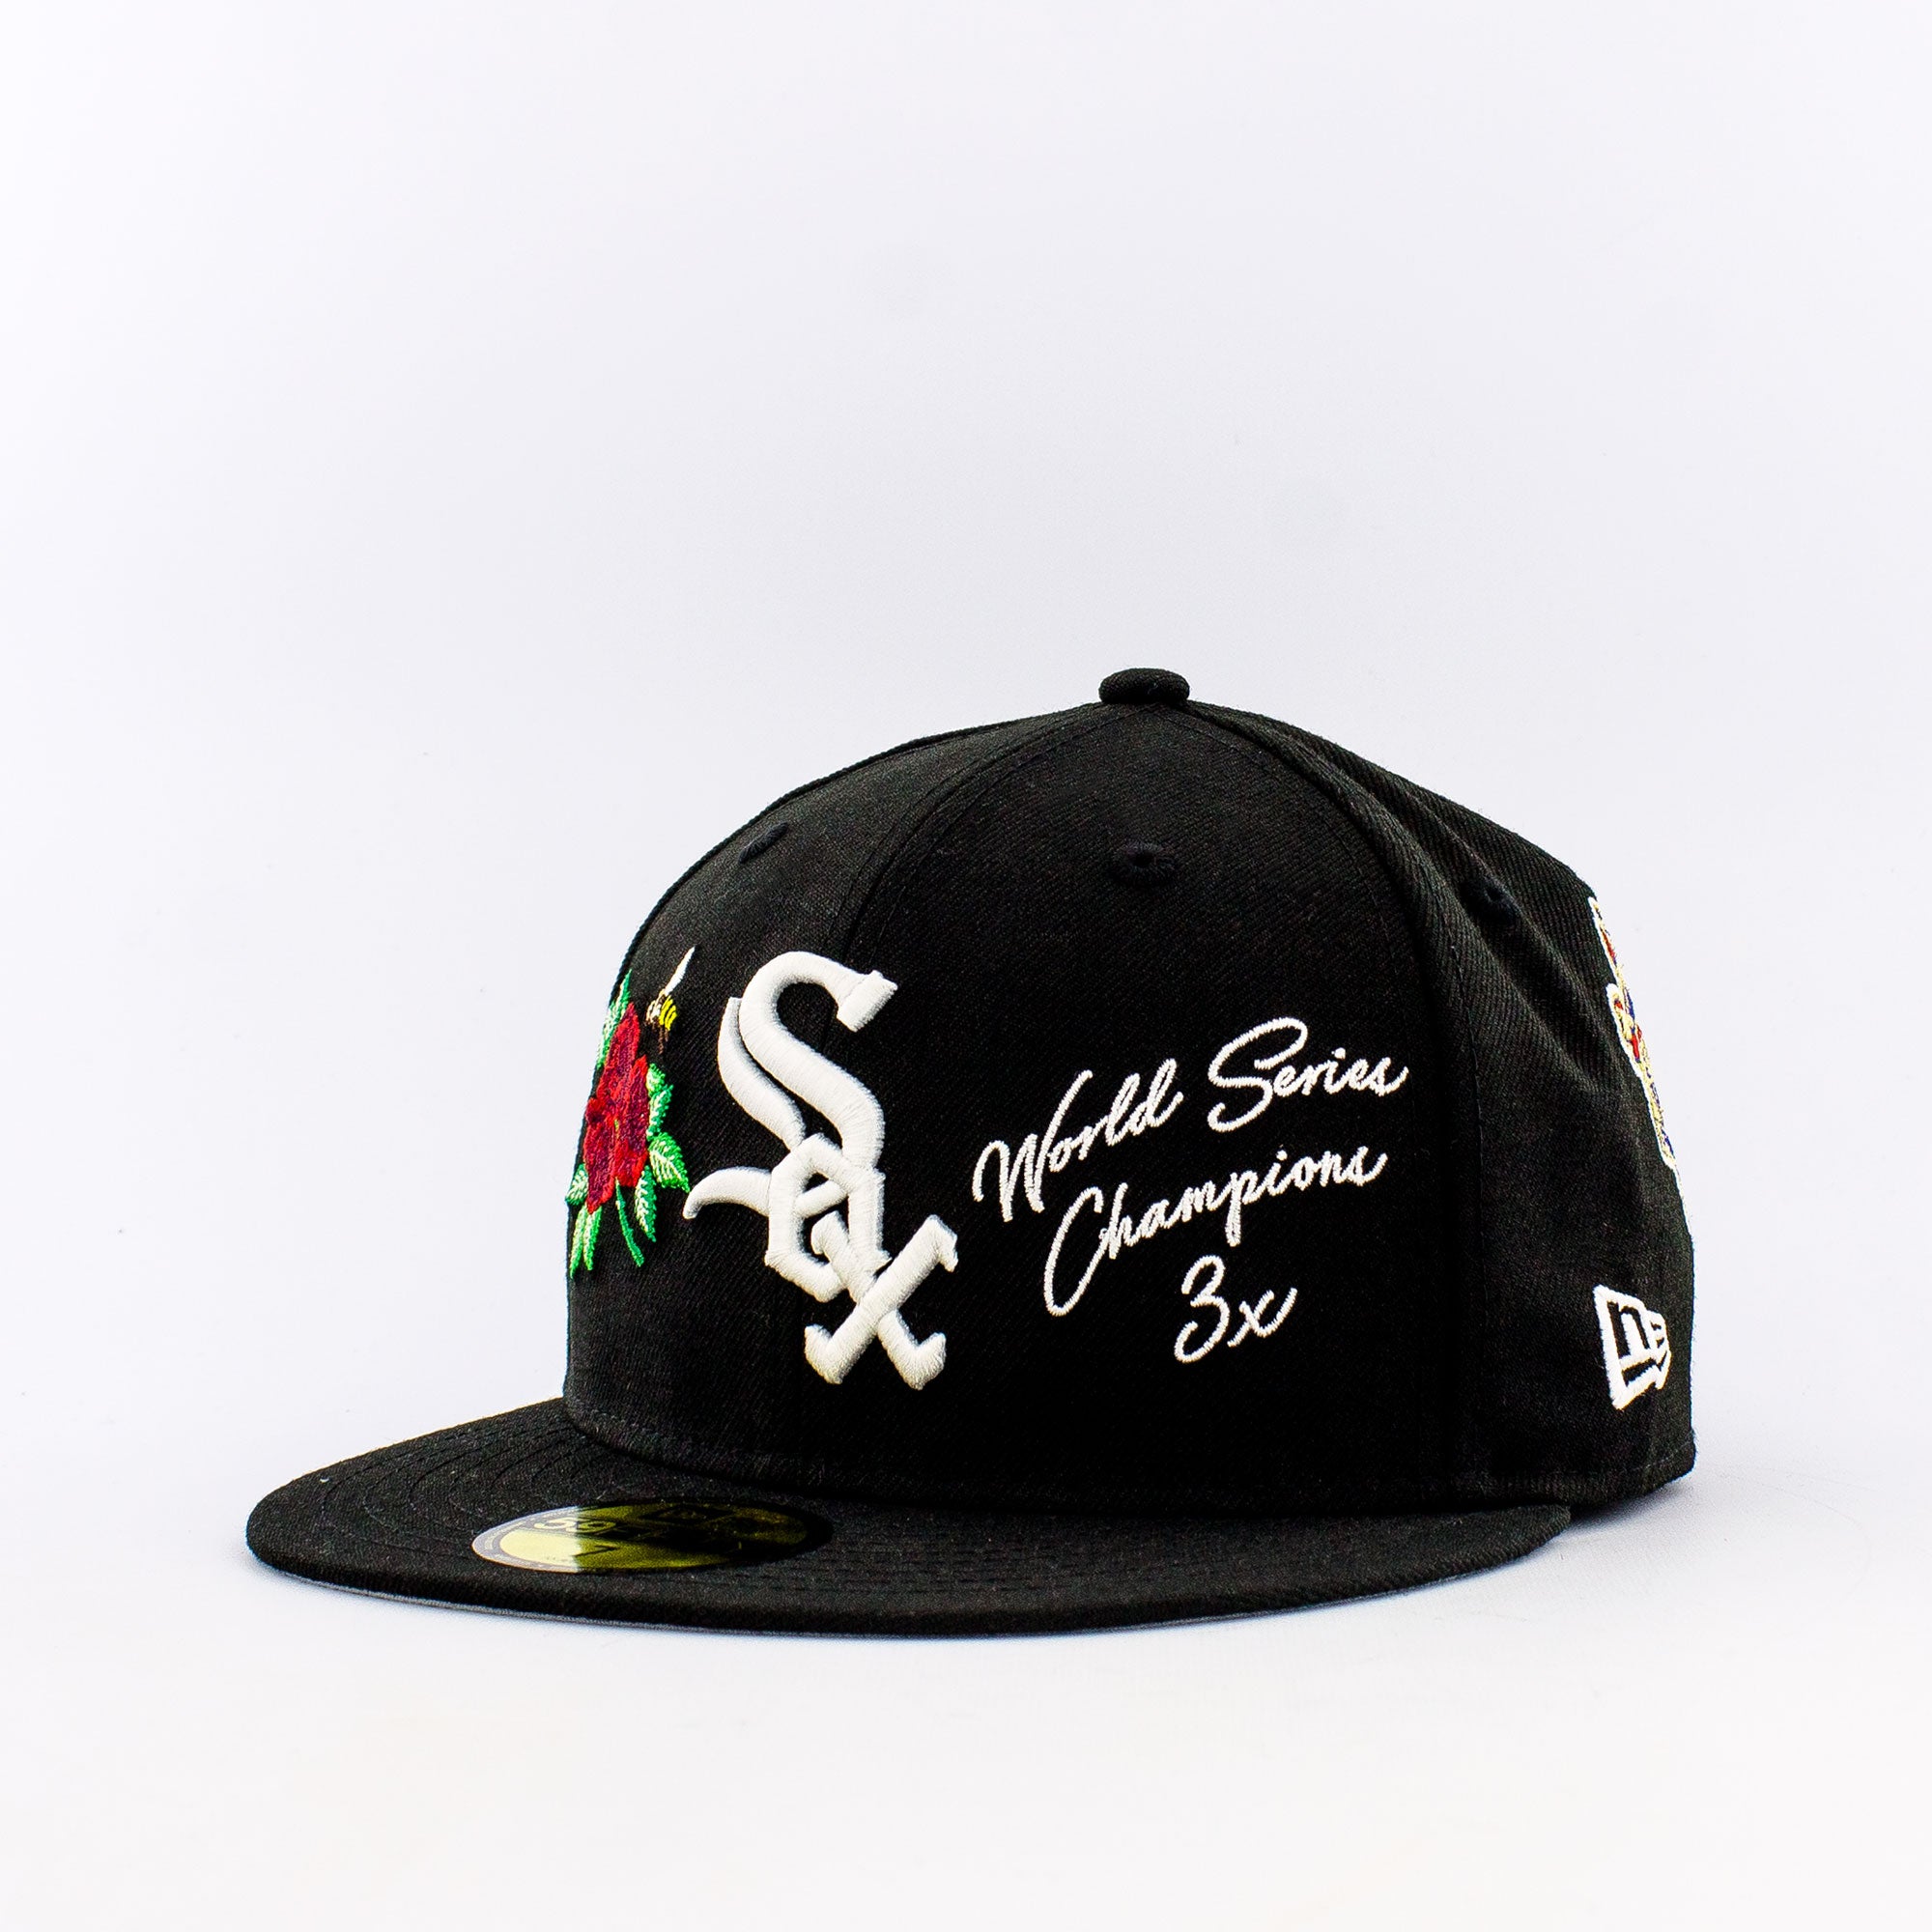 New Era MLB Chicago White Sox 59Fifty World Champions Fitted Hat